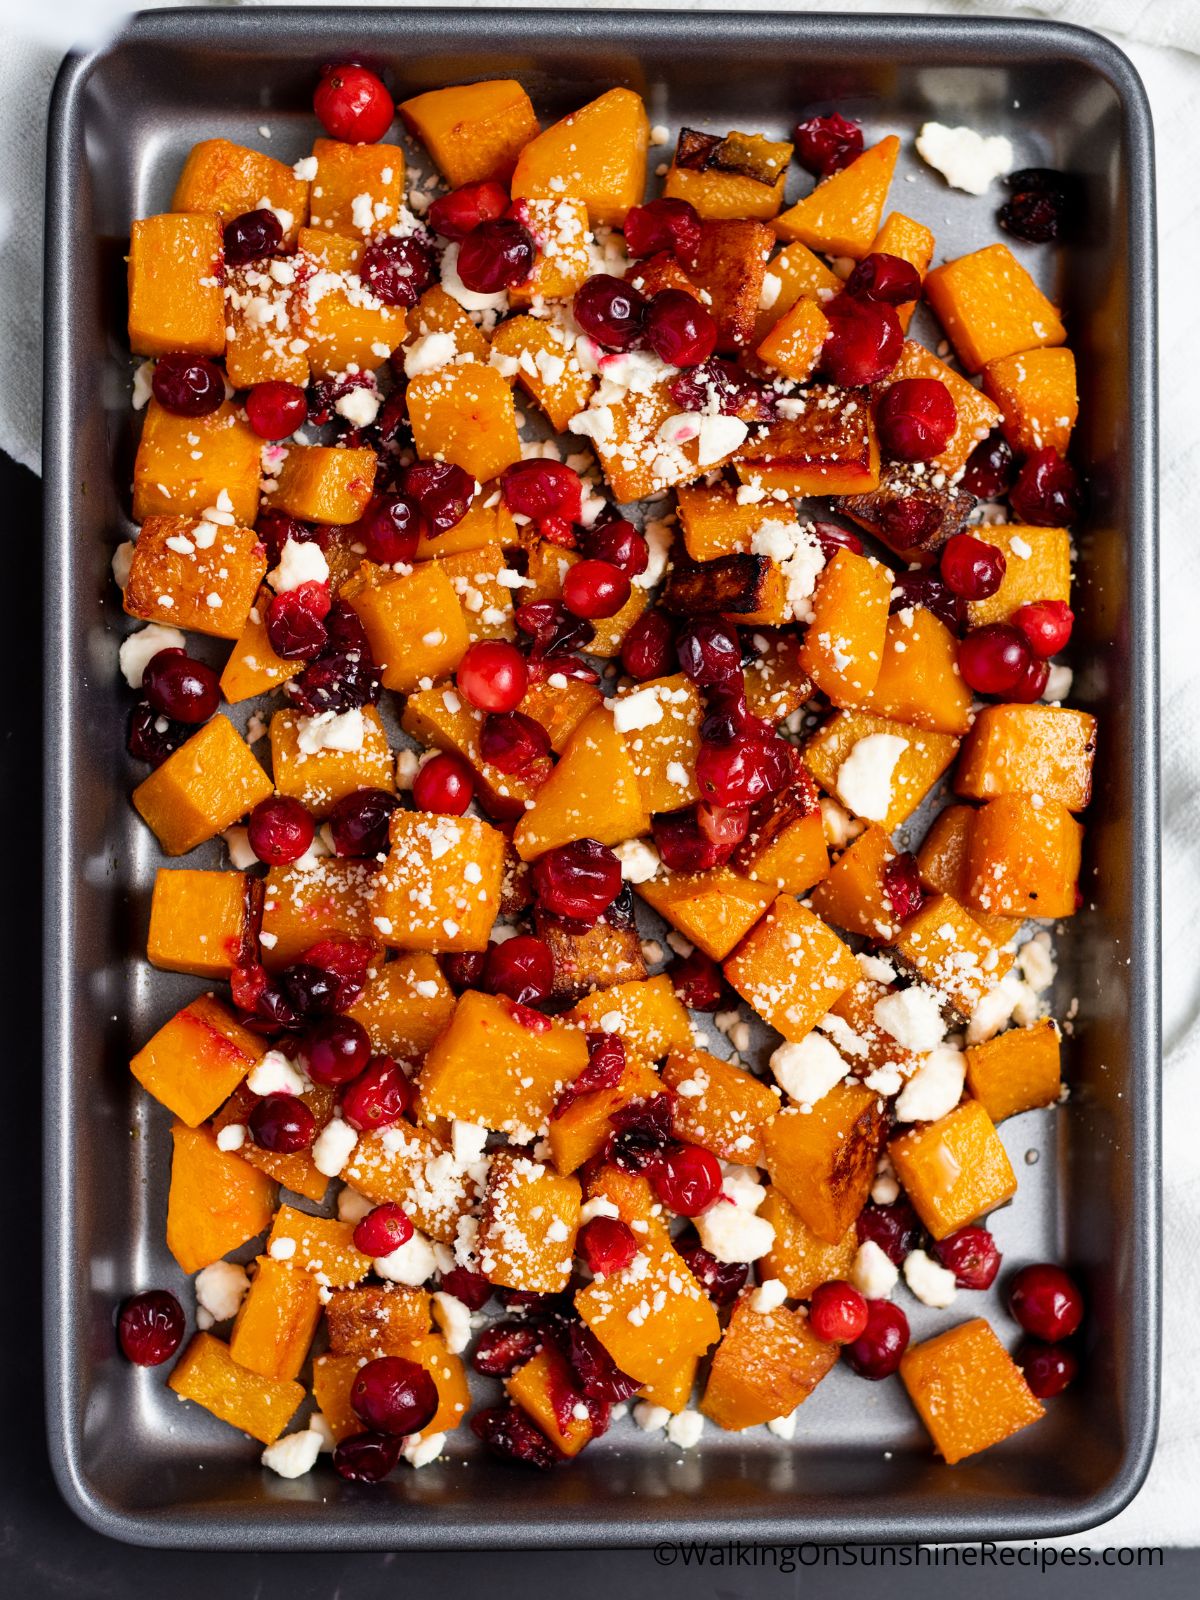 roasted butternut squash with cranberries and crumbled feta cheese.